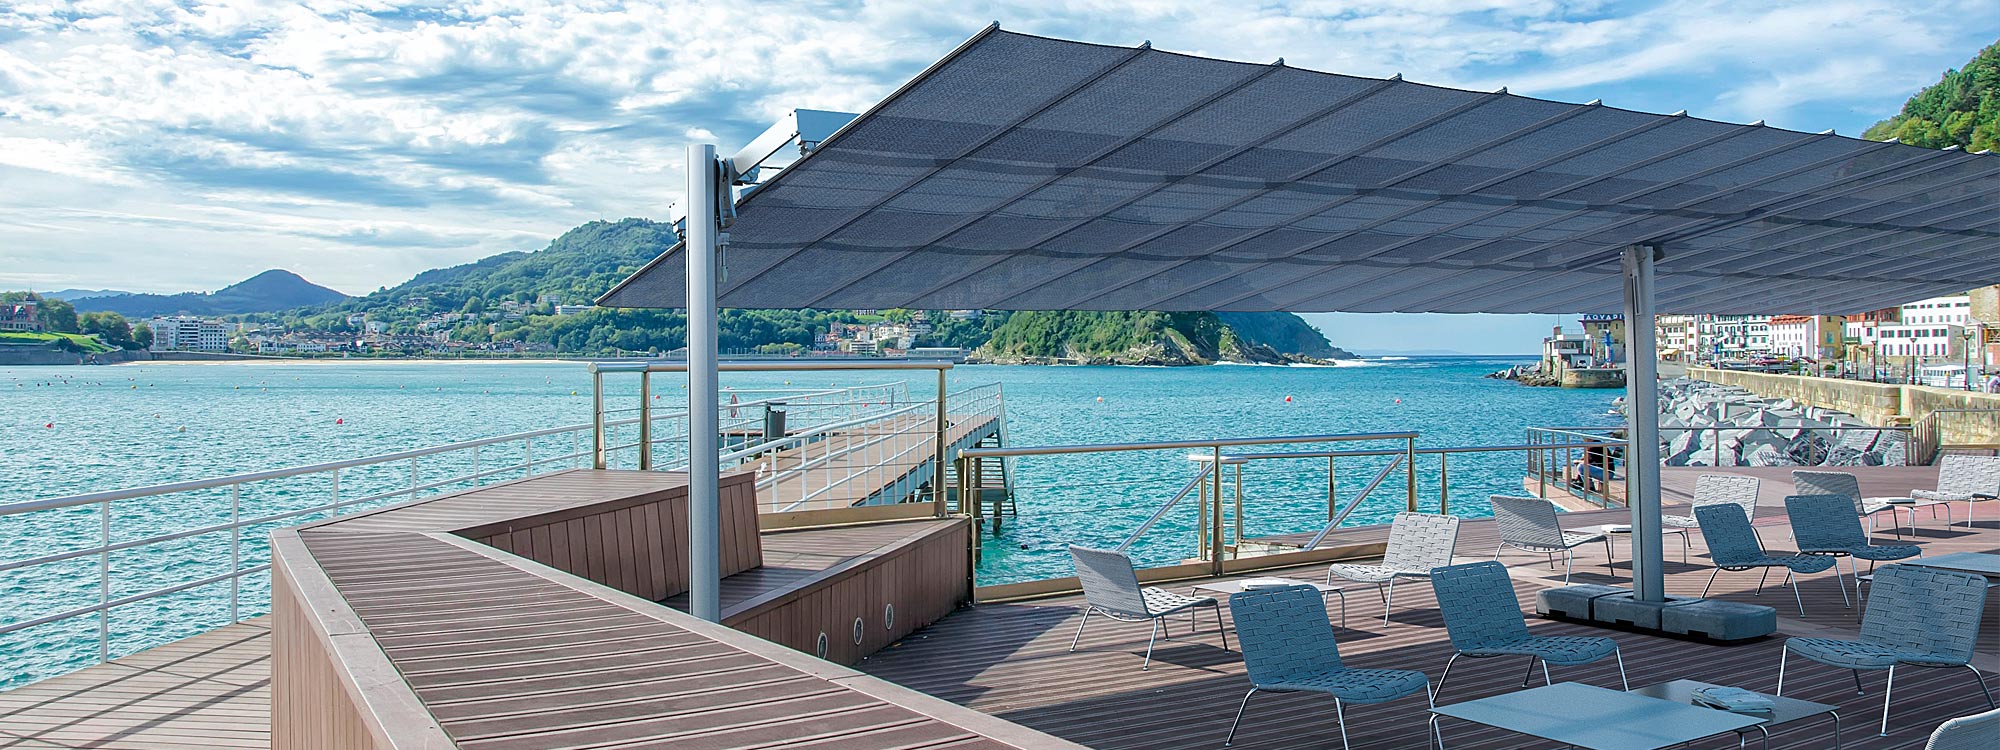 Image of pair of Flexy Large sun awnings on Italian seaside with Coro outdoor lounge furniture beneath the canopies